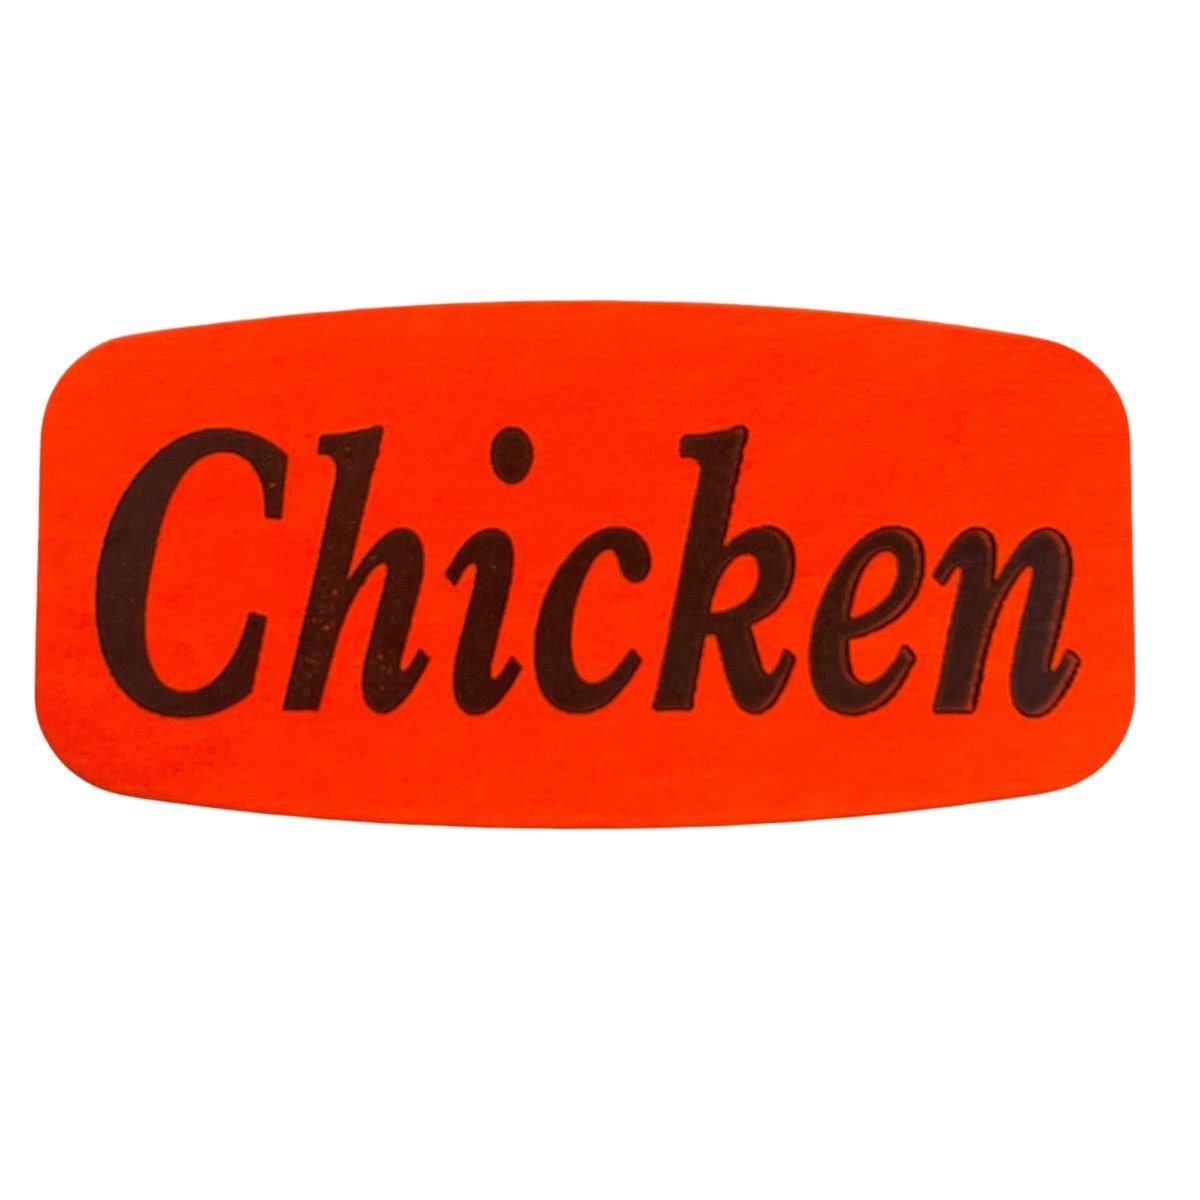 Bollin Label 12440 - Chicken Label Short Oval Black on Red - Roll of 1000